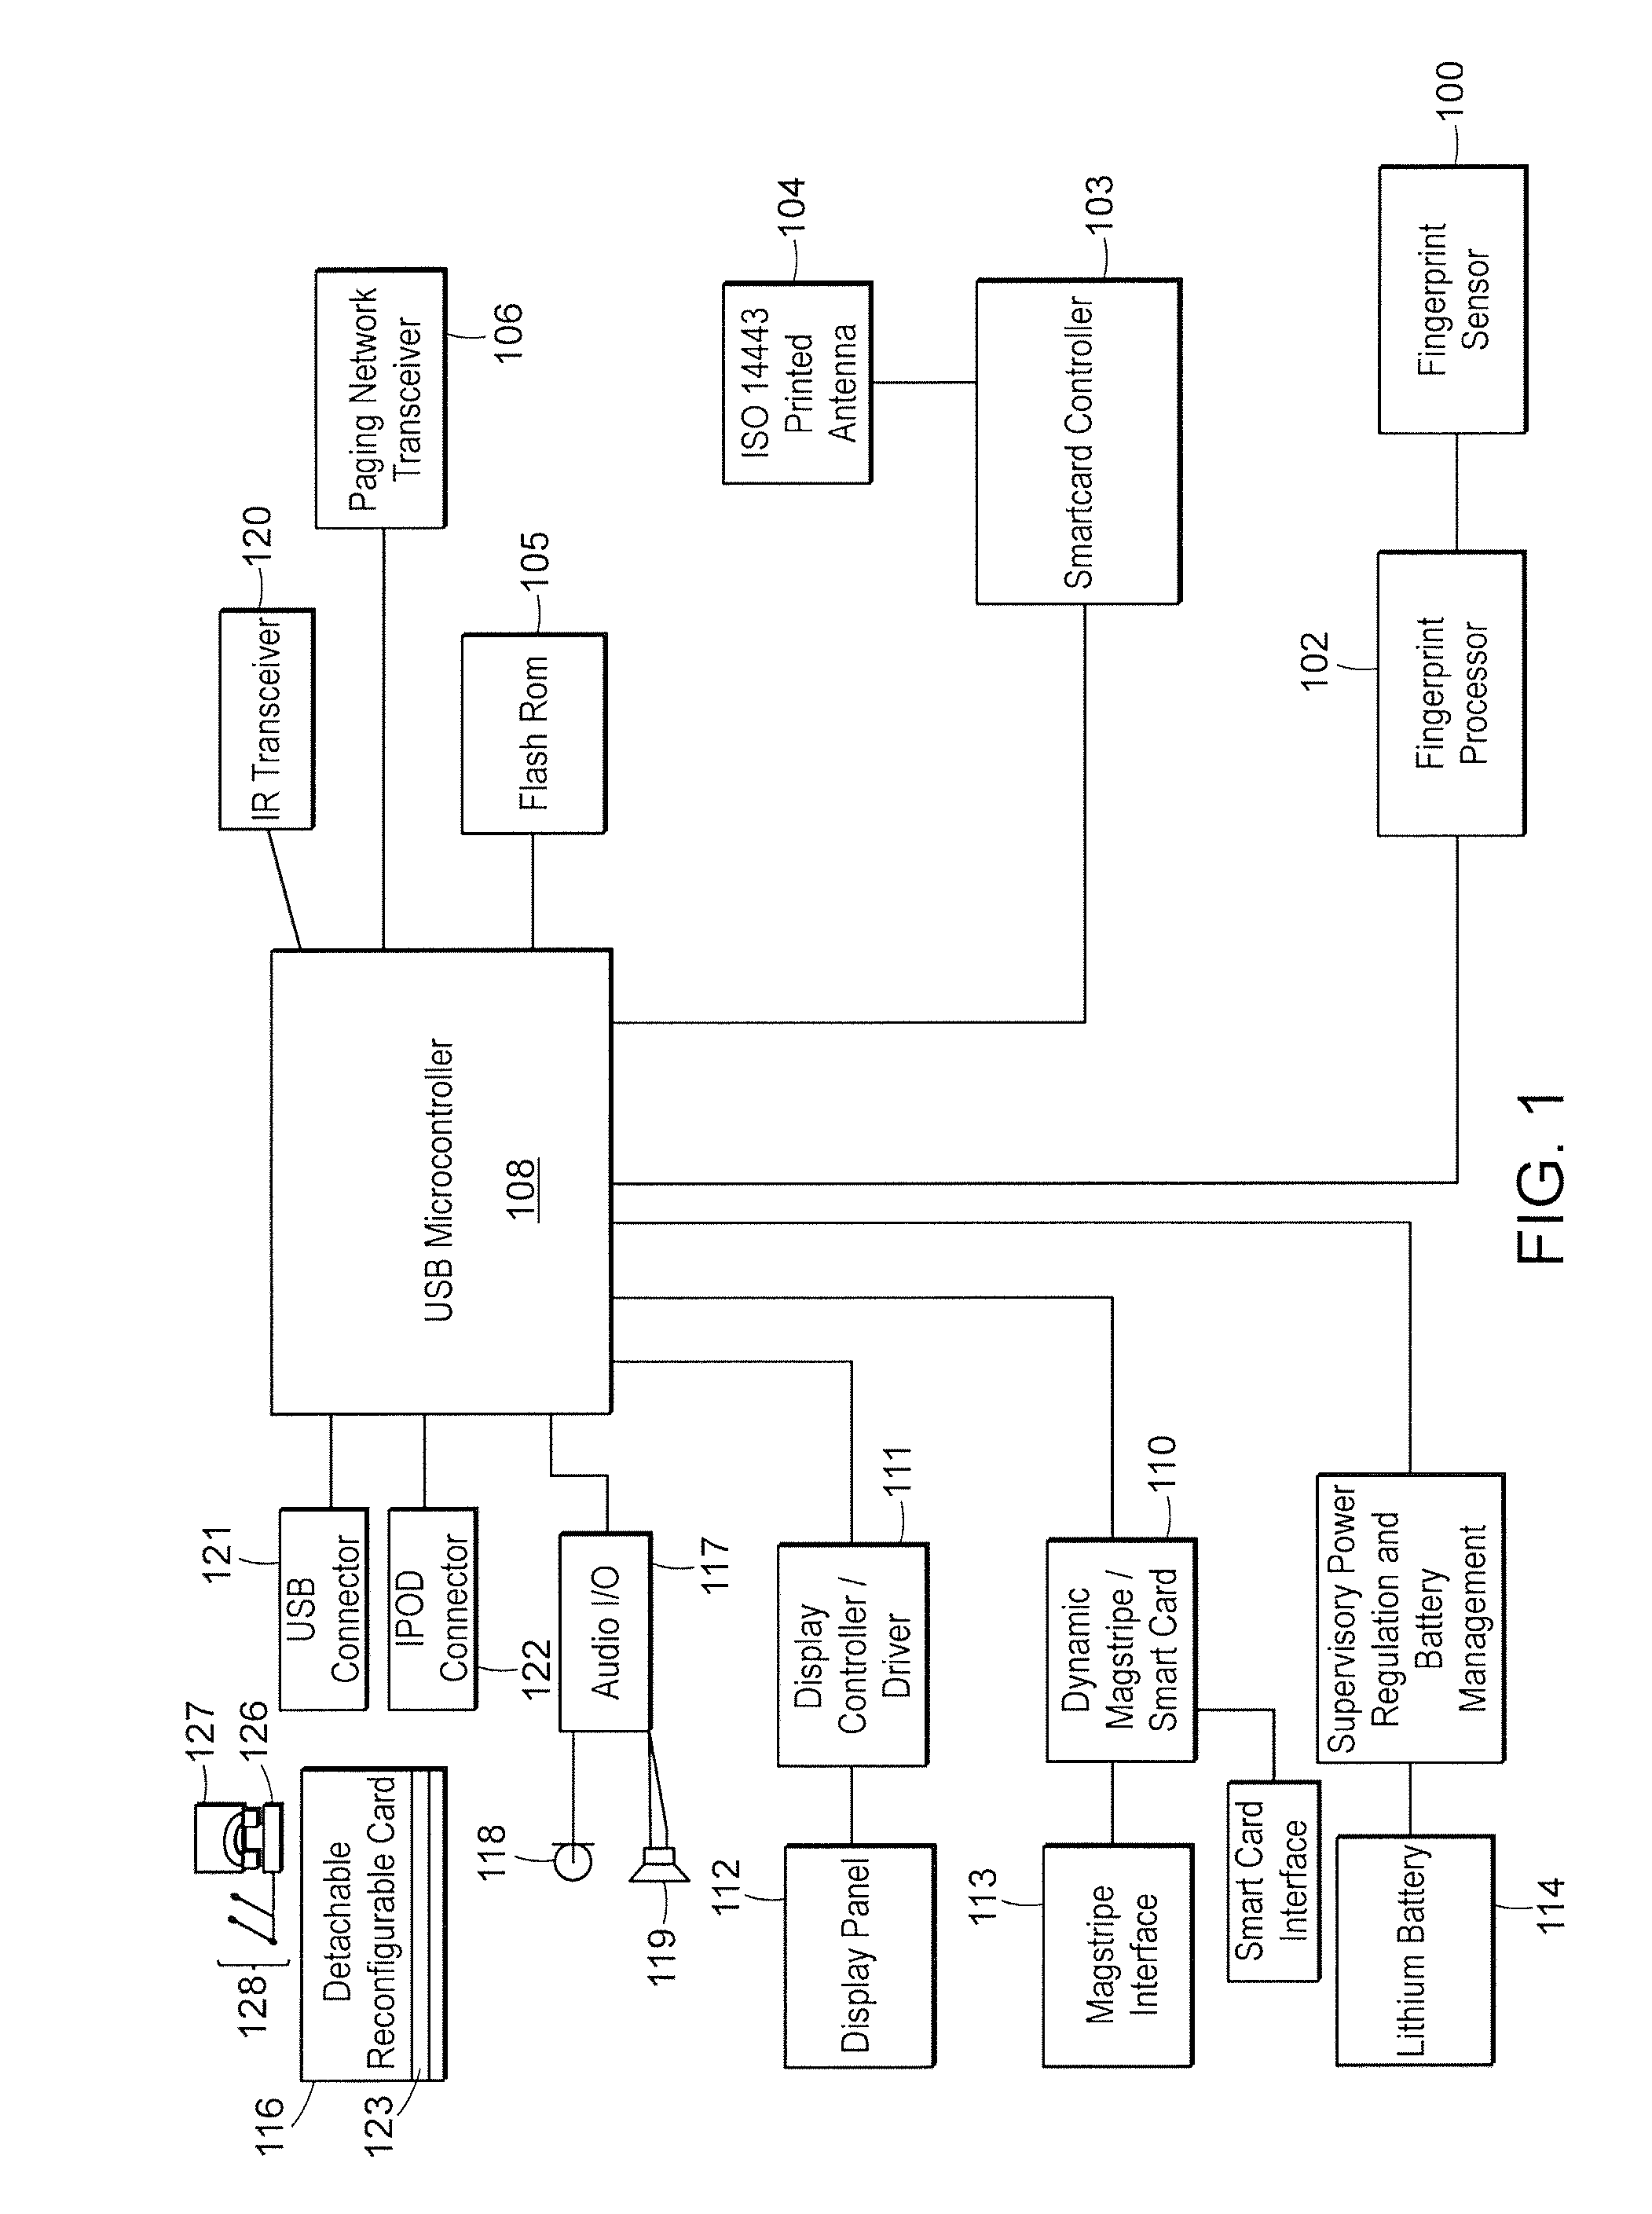 Method and apparatus for biometrically secured encrypted data storage and retrieval